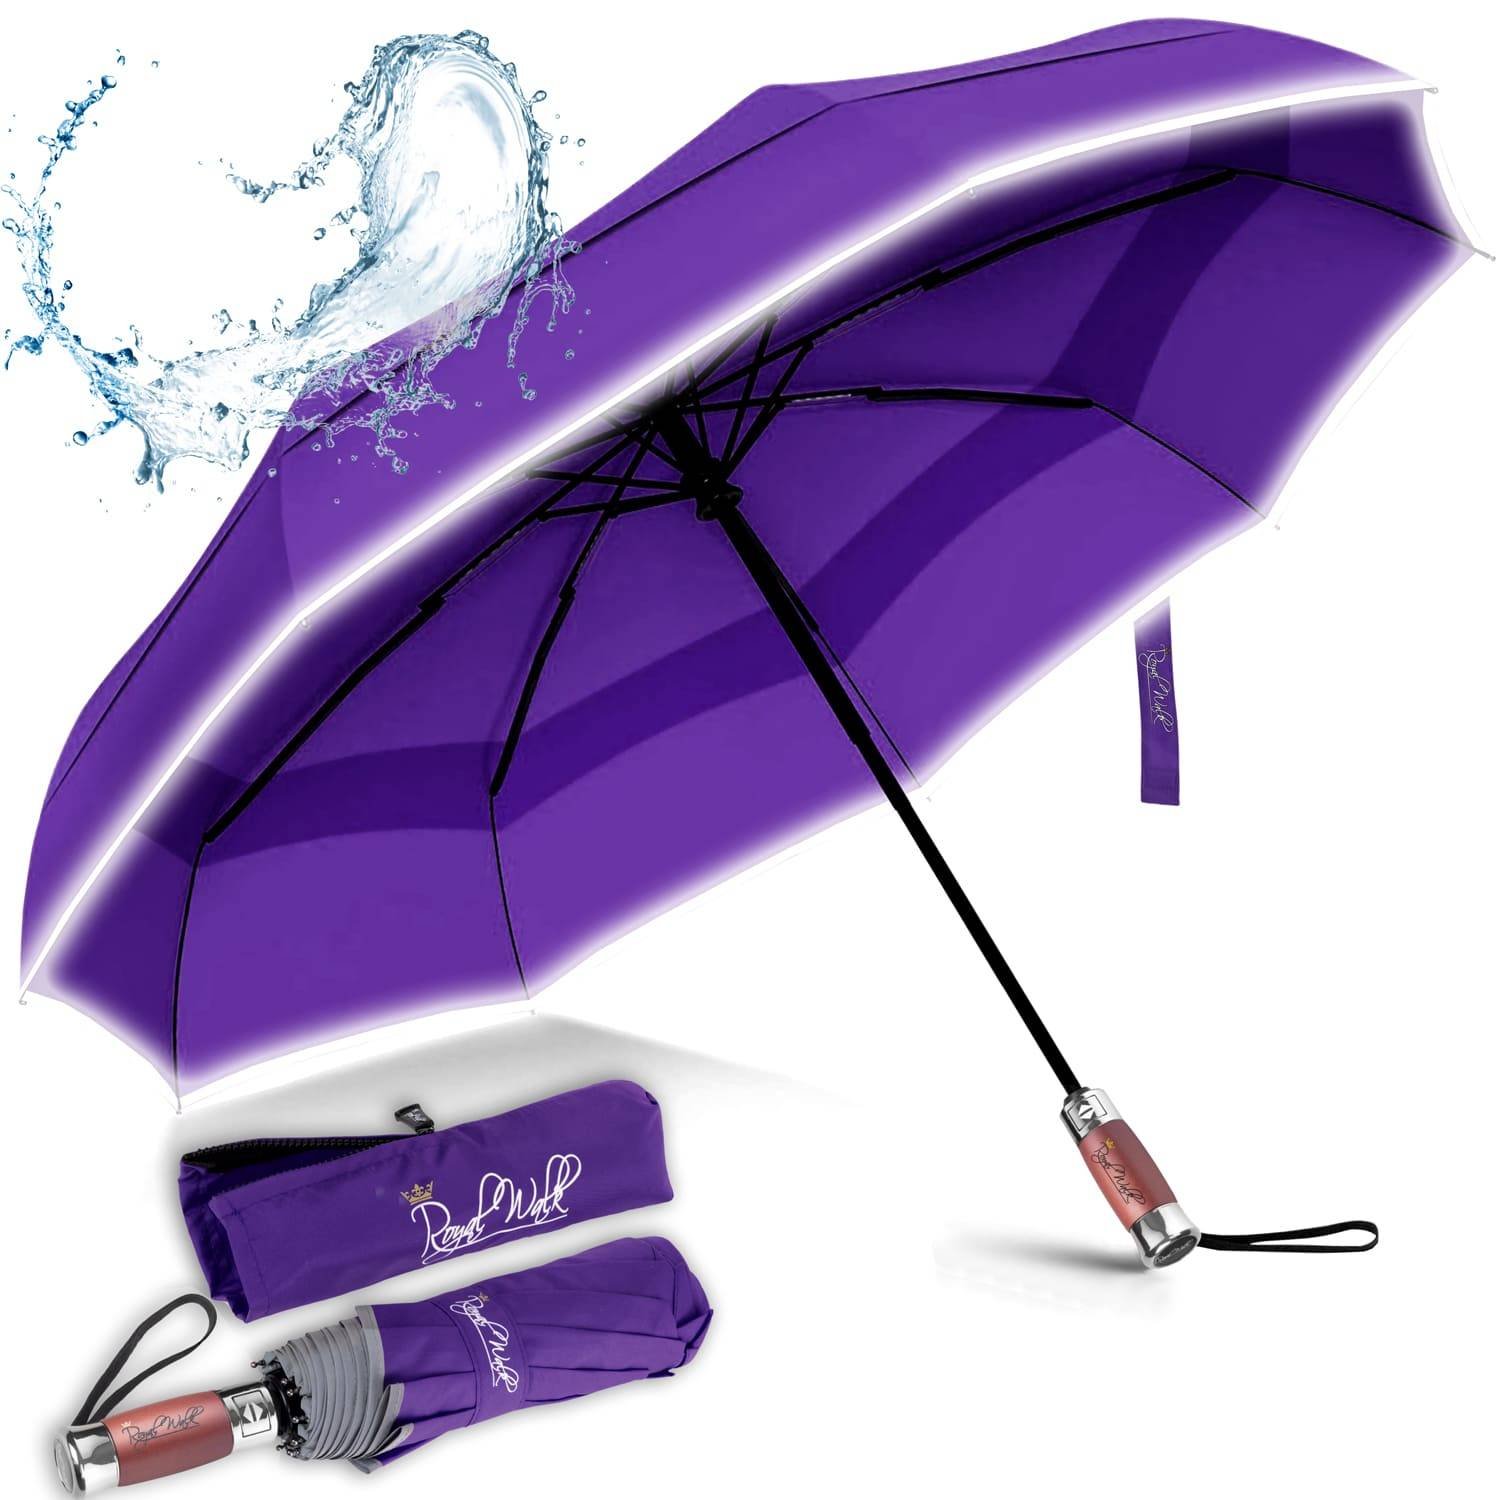 folding windproof umbrella for rain compact vented double canopy wood handle automatic open close 41 inch 103 cm purple 1500